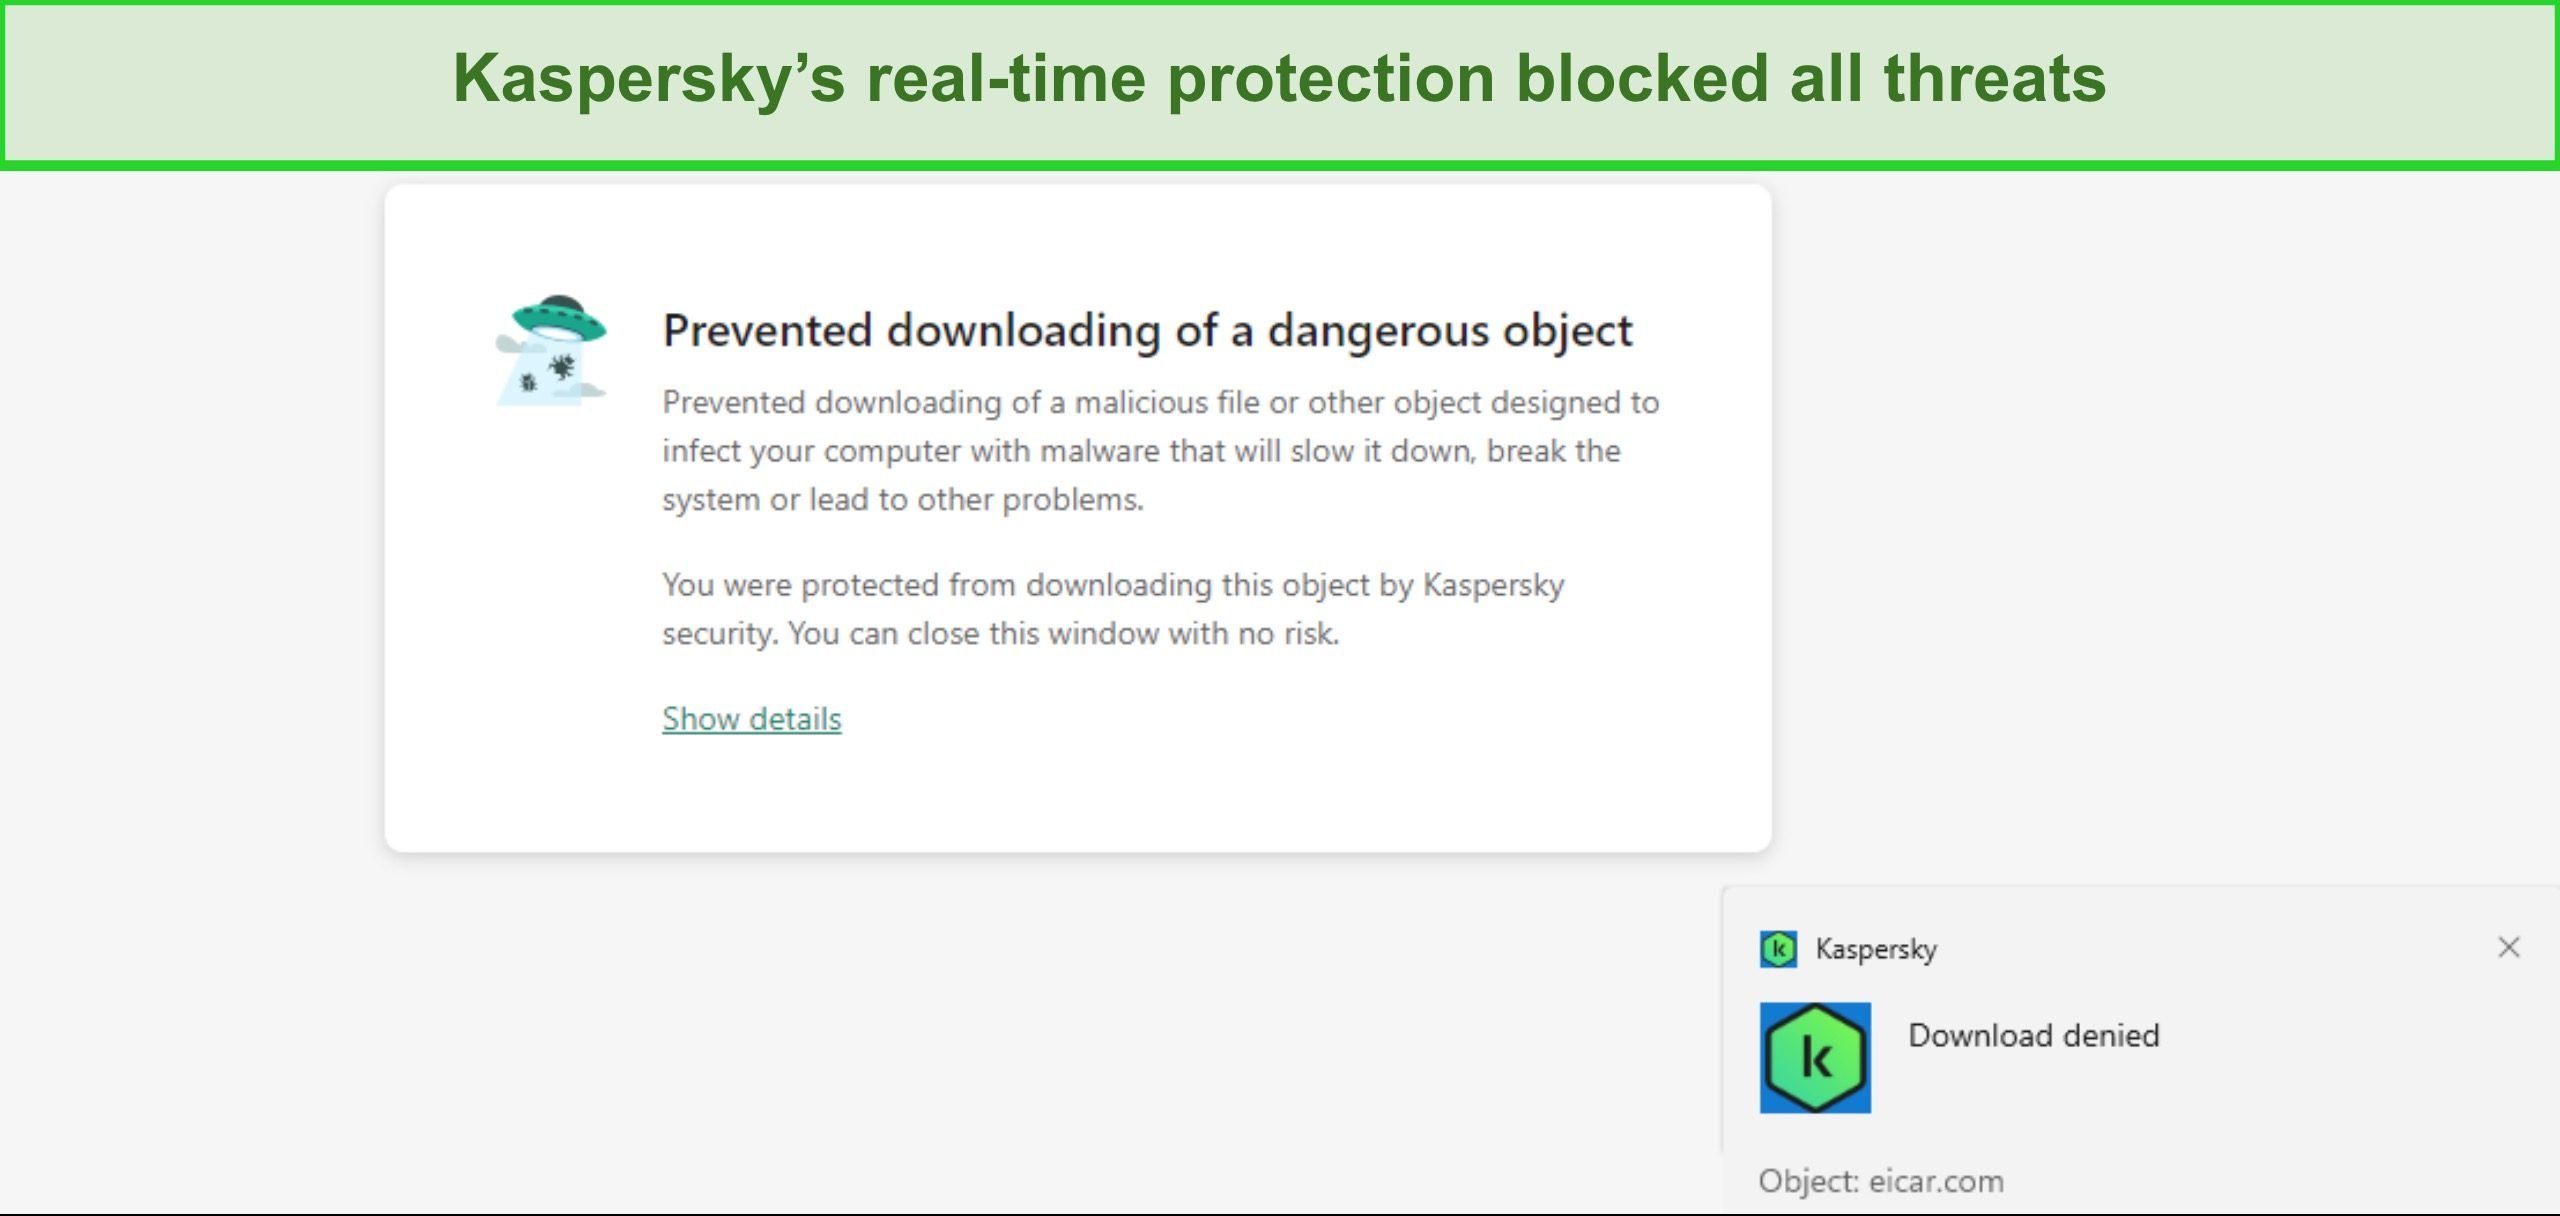 Kaspersky’s real-time security will secure you against all threats